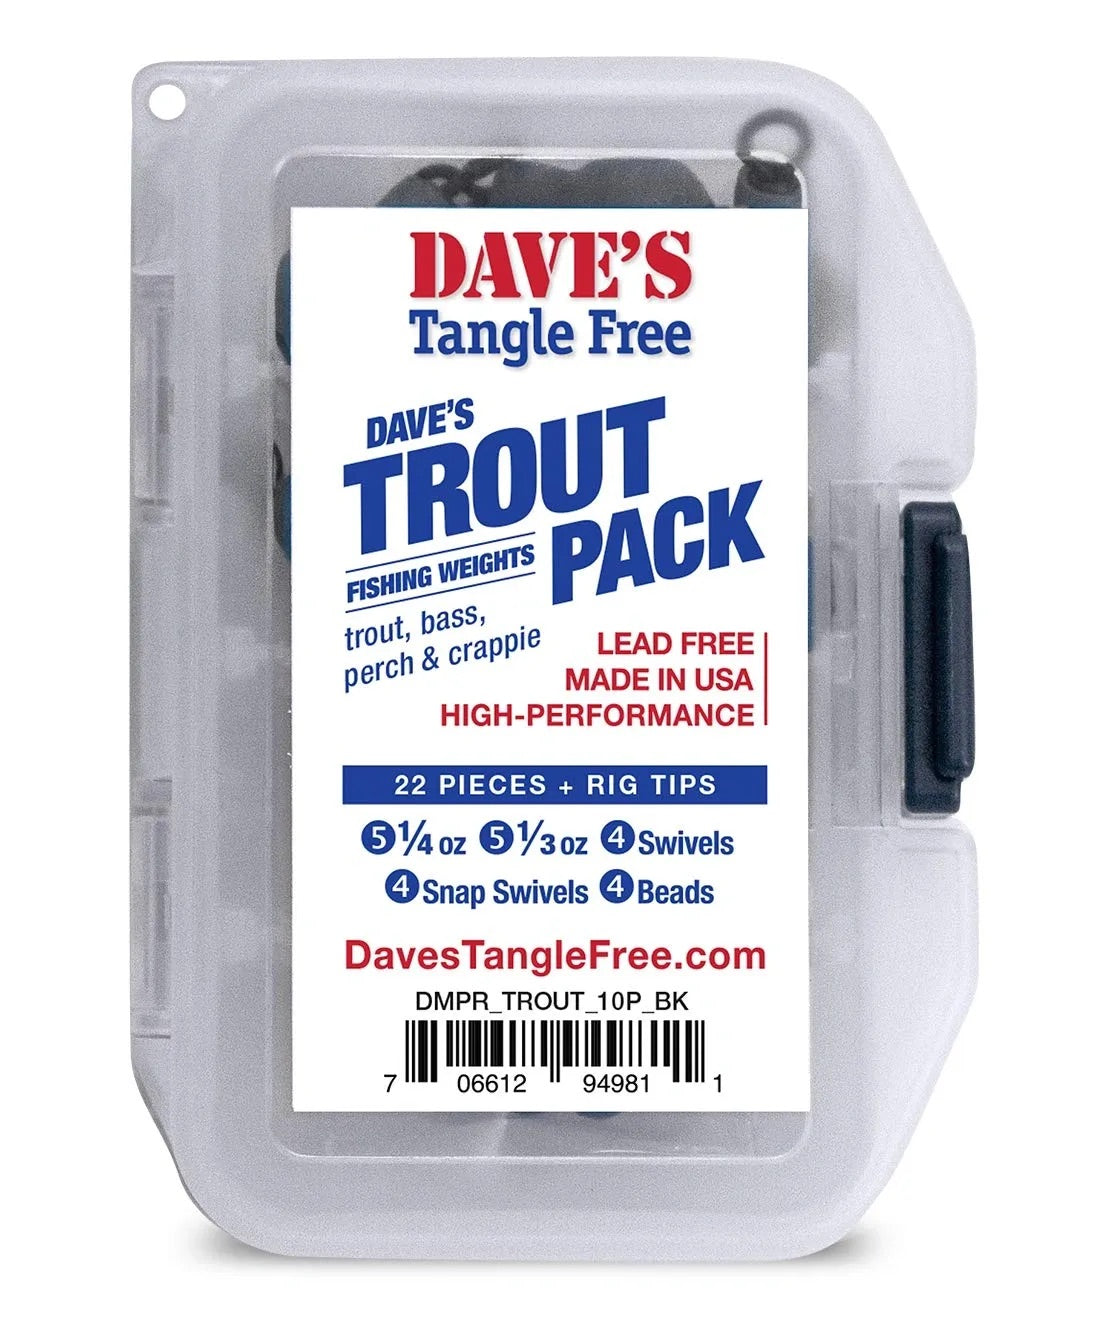 Dave's Tangle Free Trout Pack – Never Quit Fishing